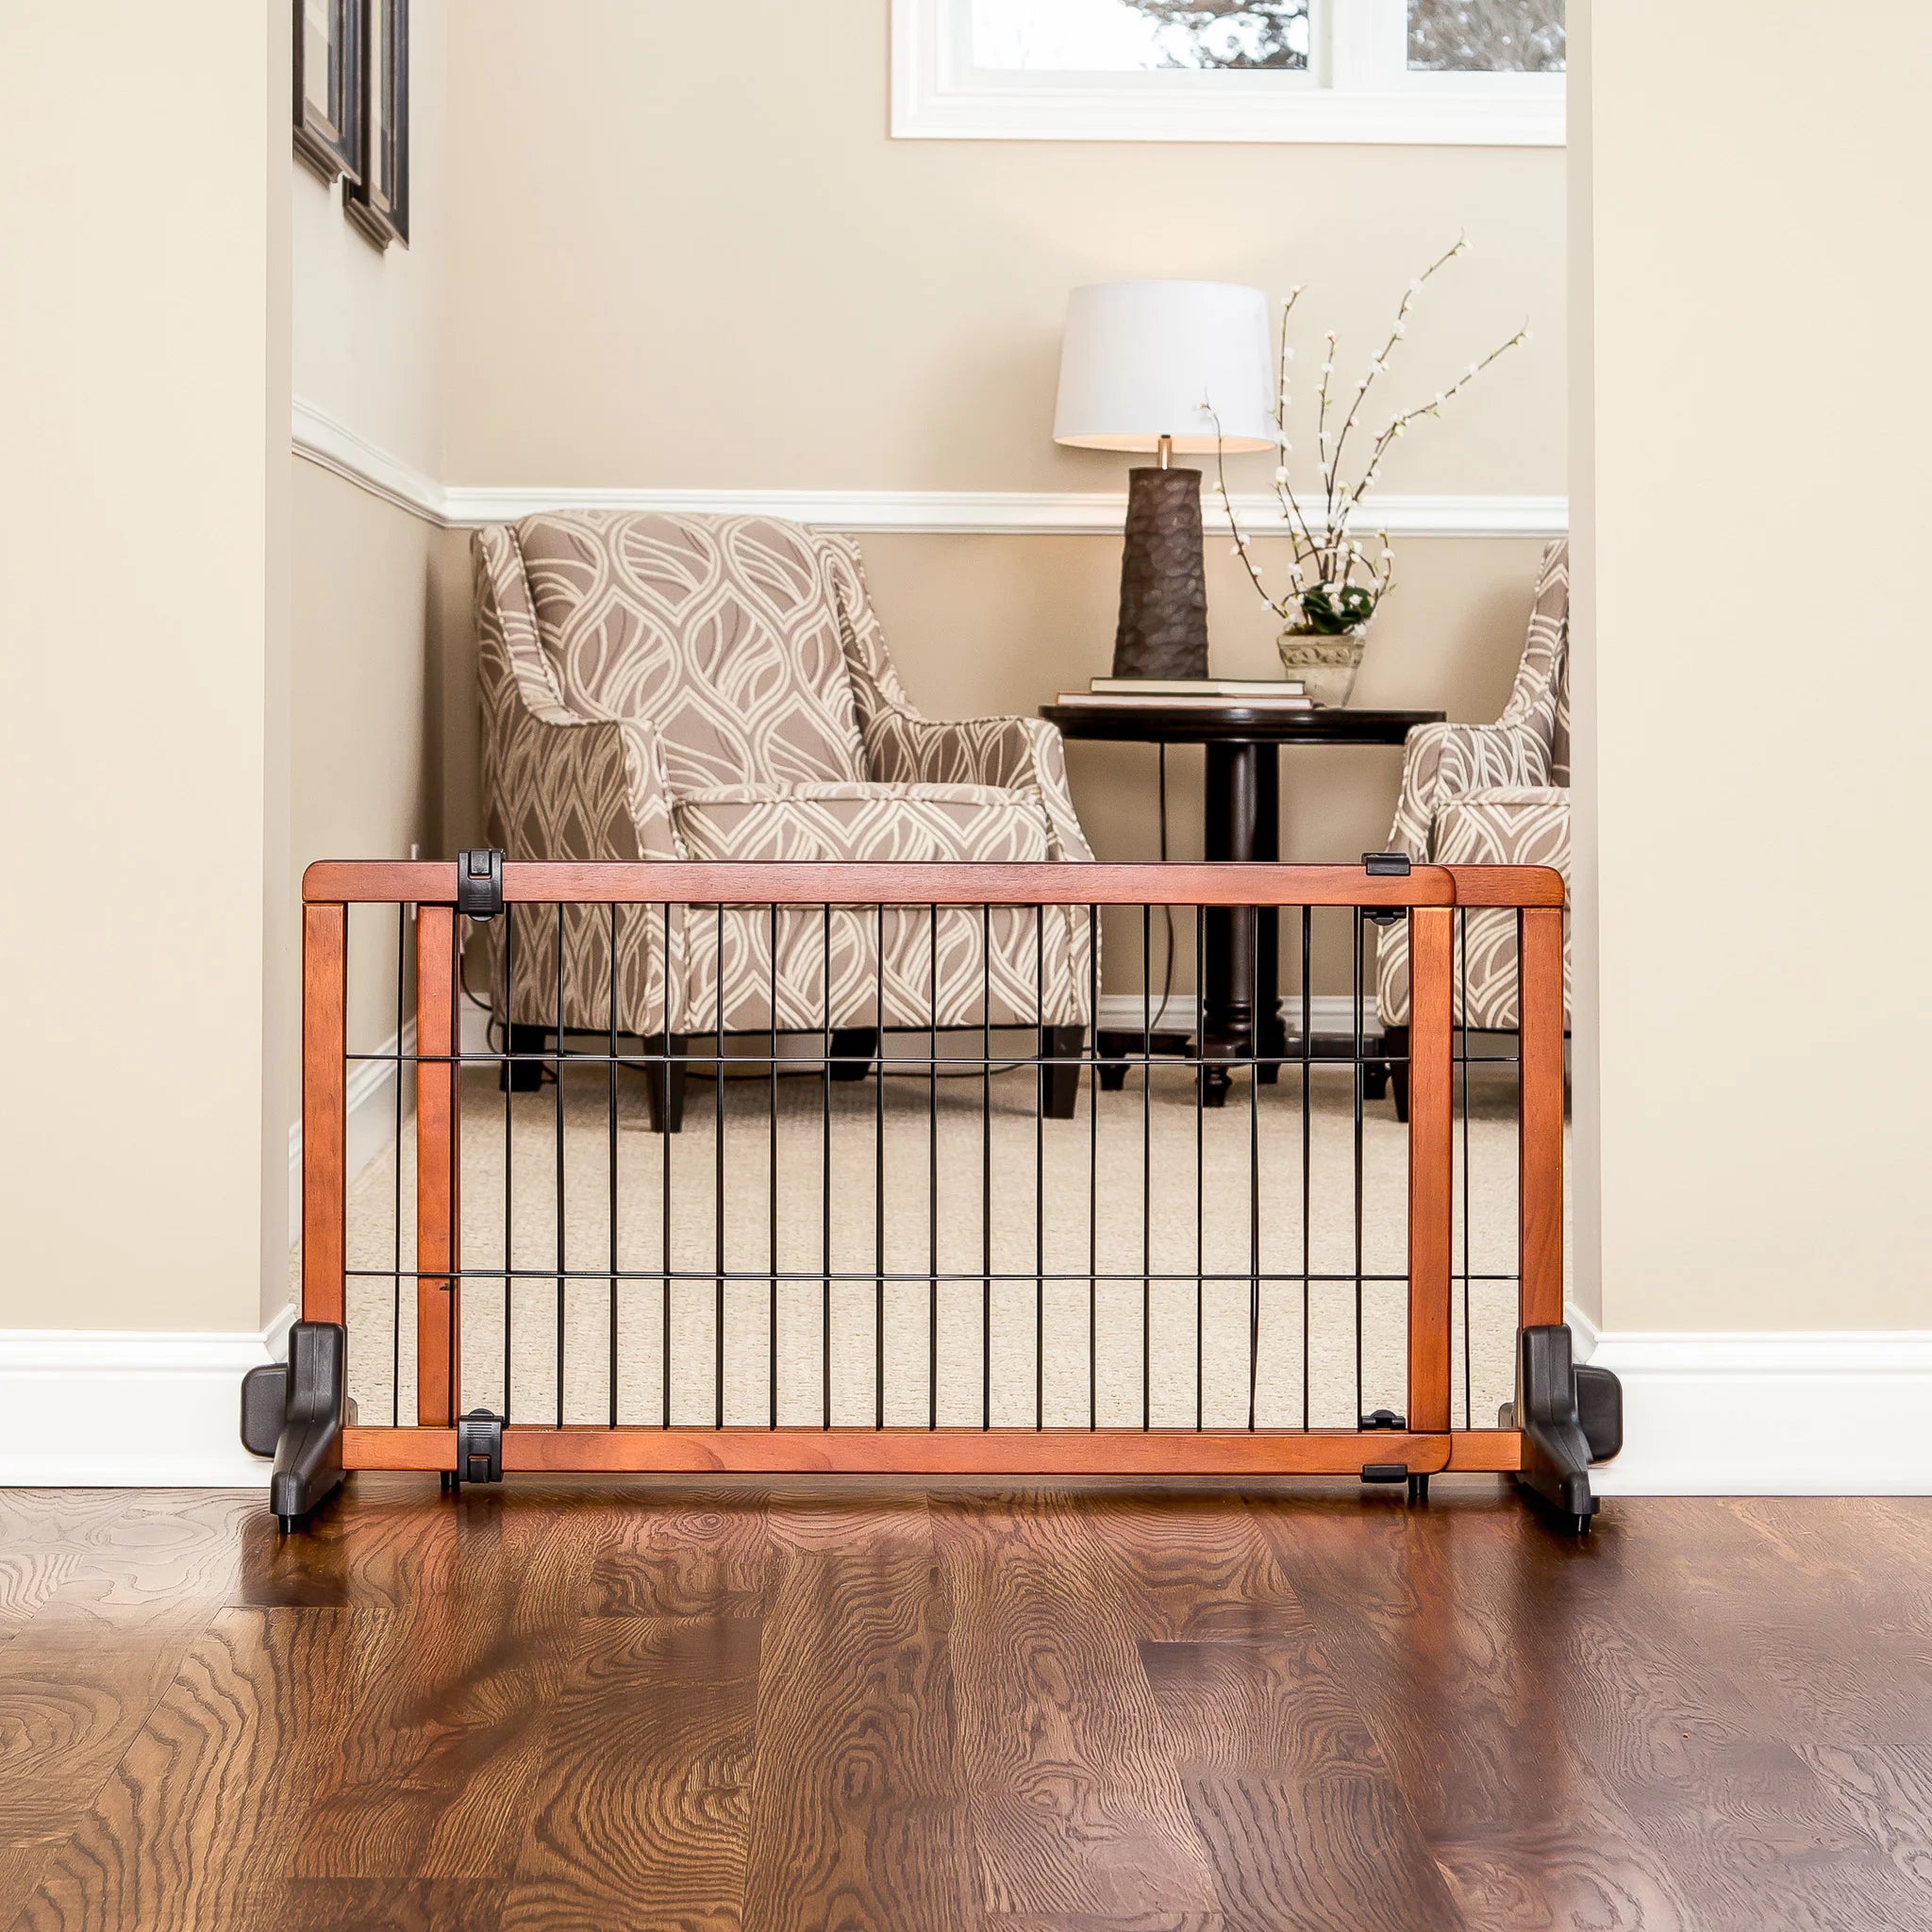 Design Paw Extra Wide Freestanding Pet Gate set up in living room.